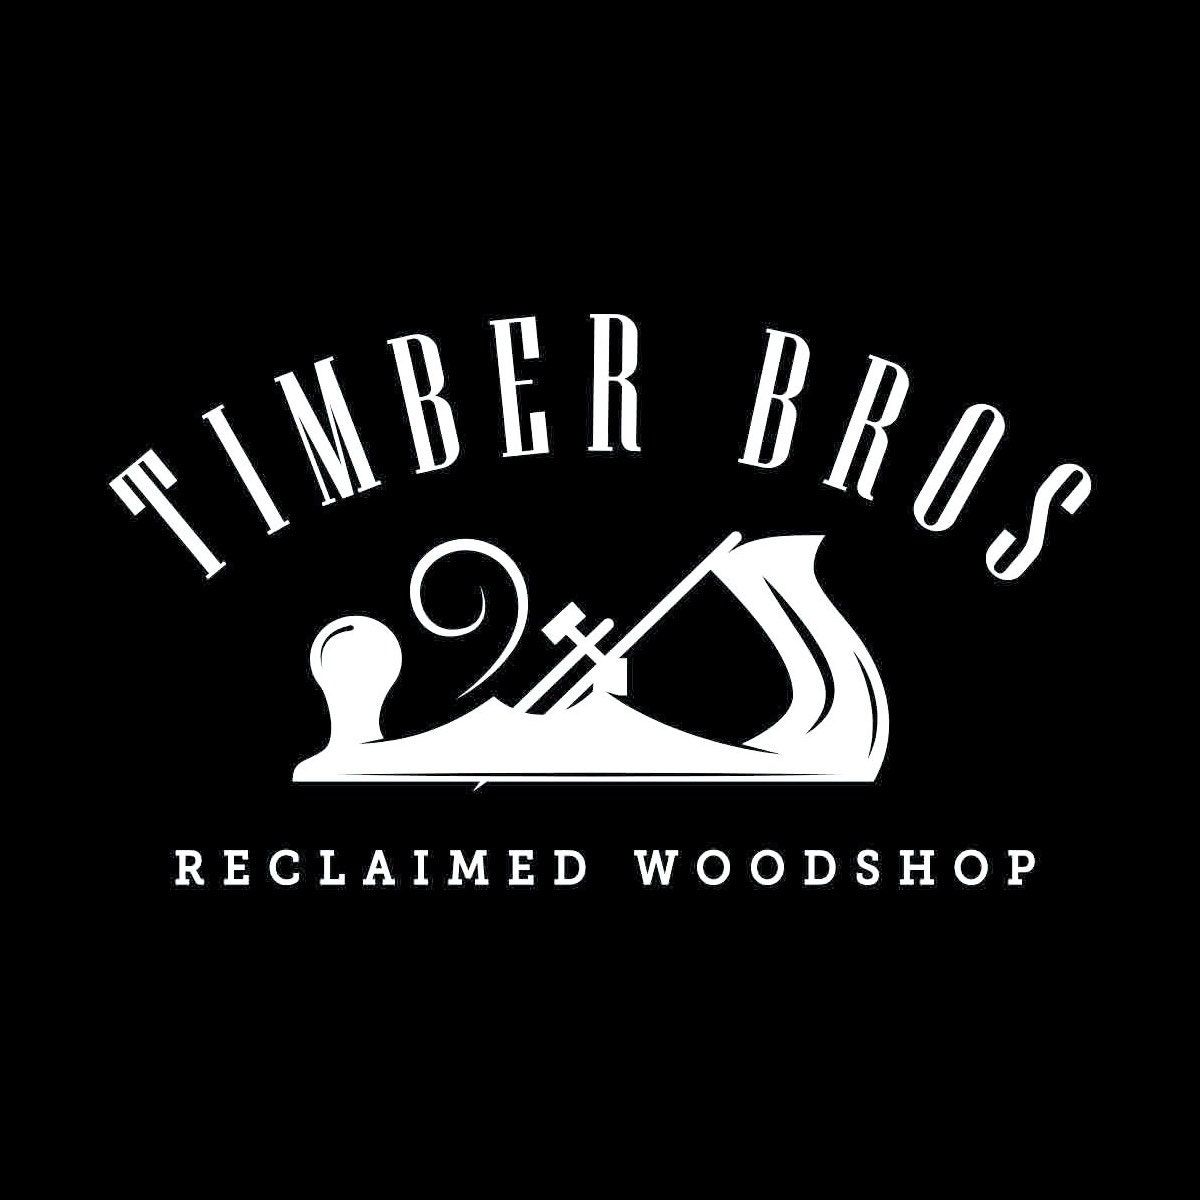 Timber Bros Up cycled & reclaimed sustainable by Timberbros